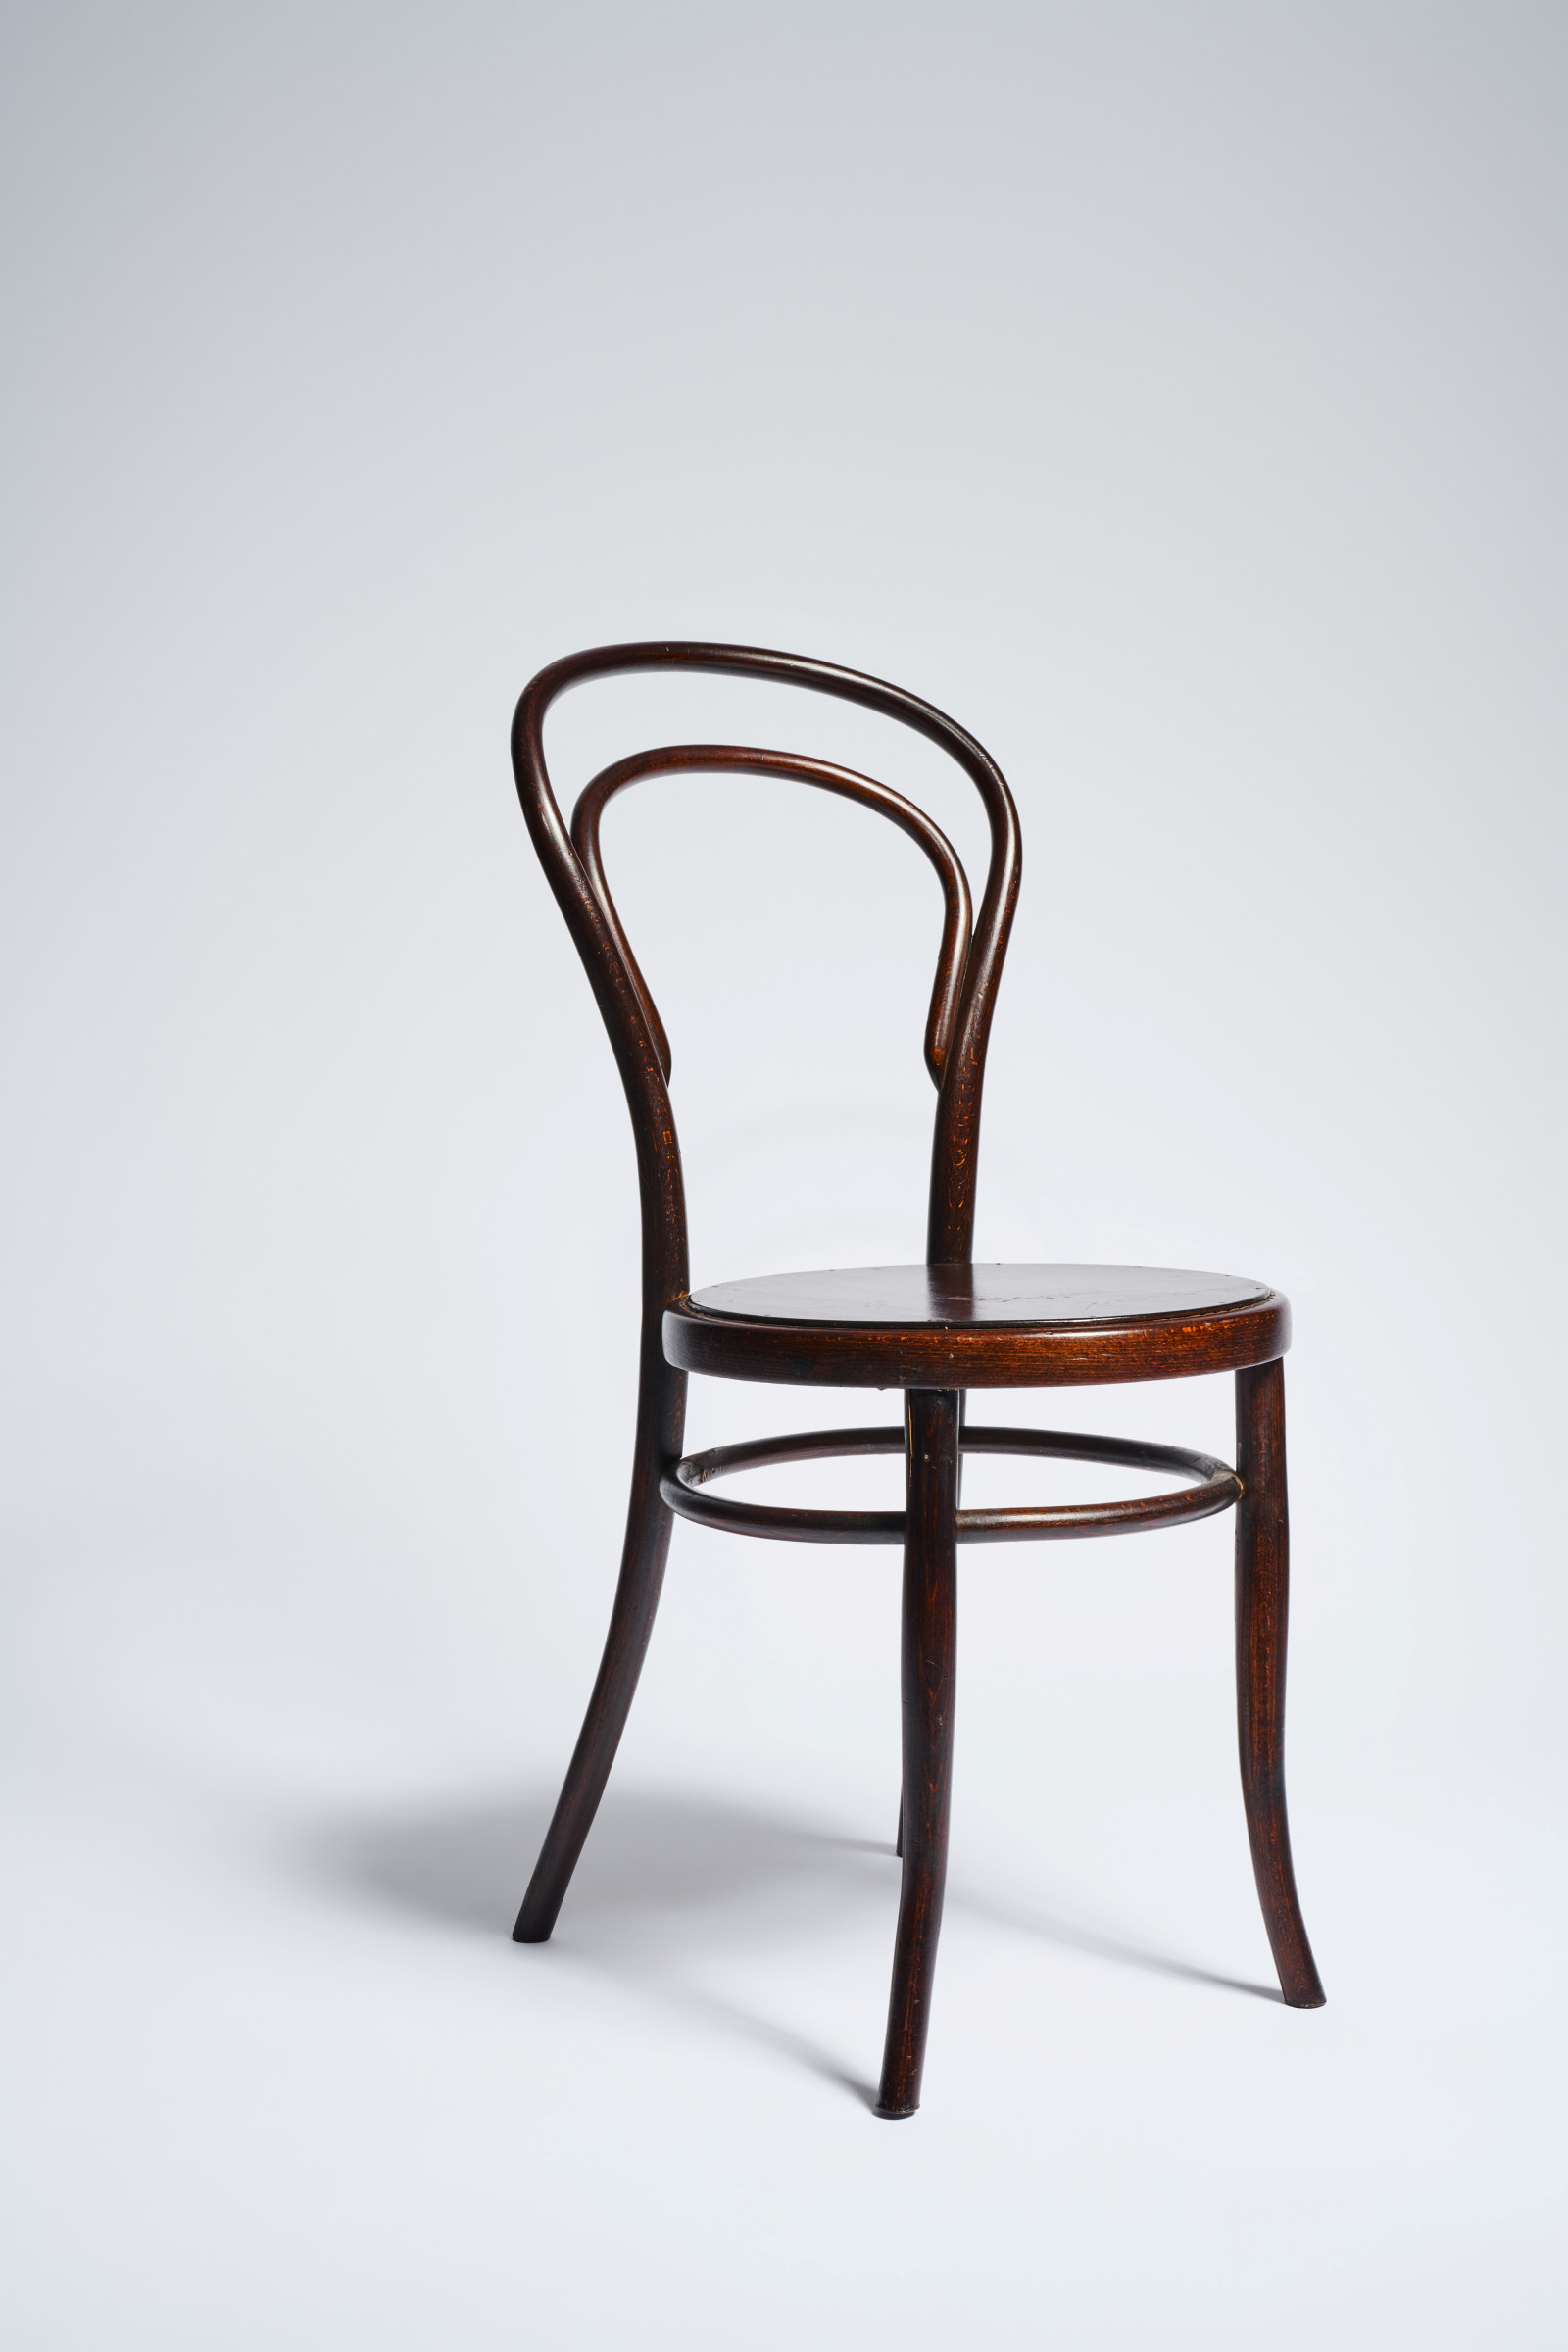 Bentwood chair, Justice and Police Museum